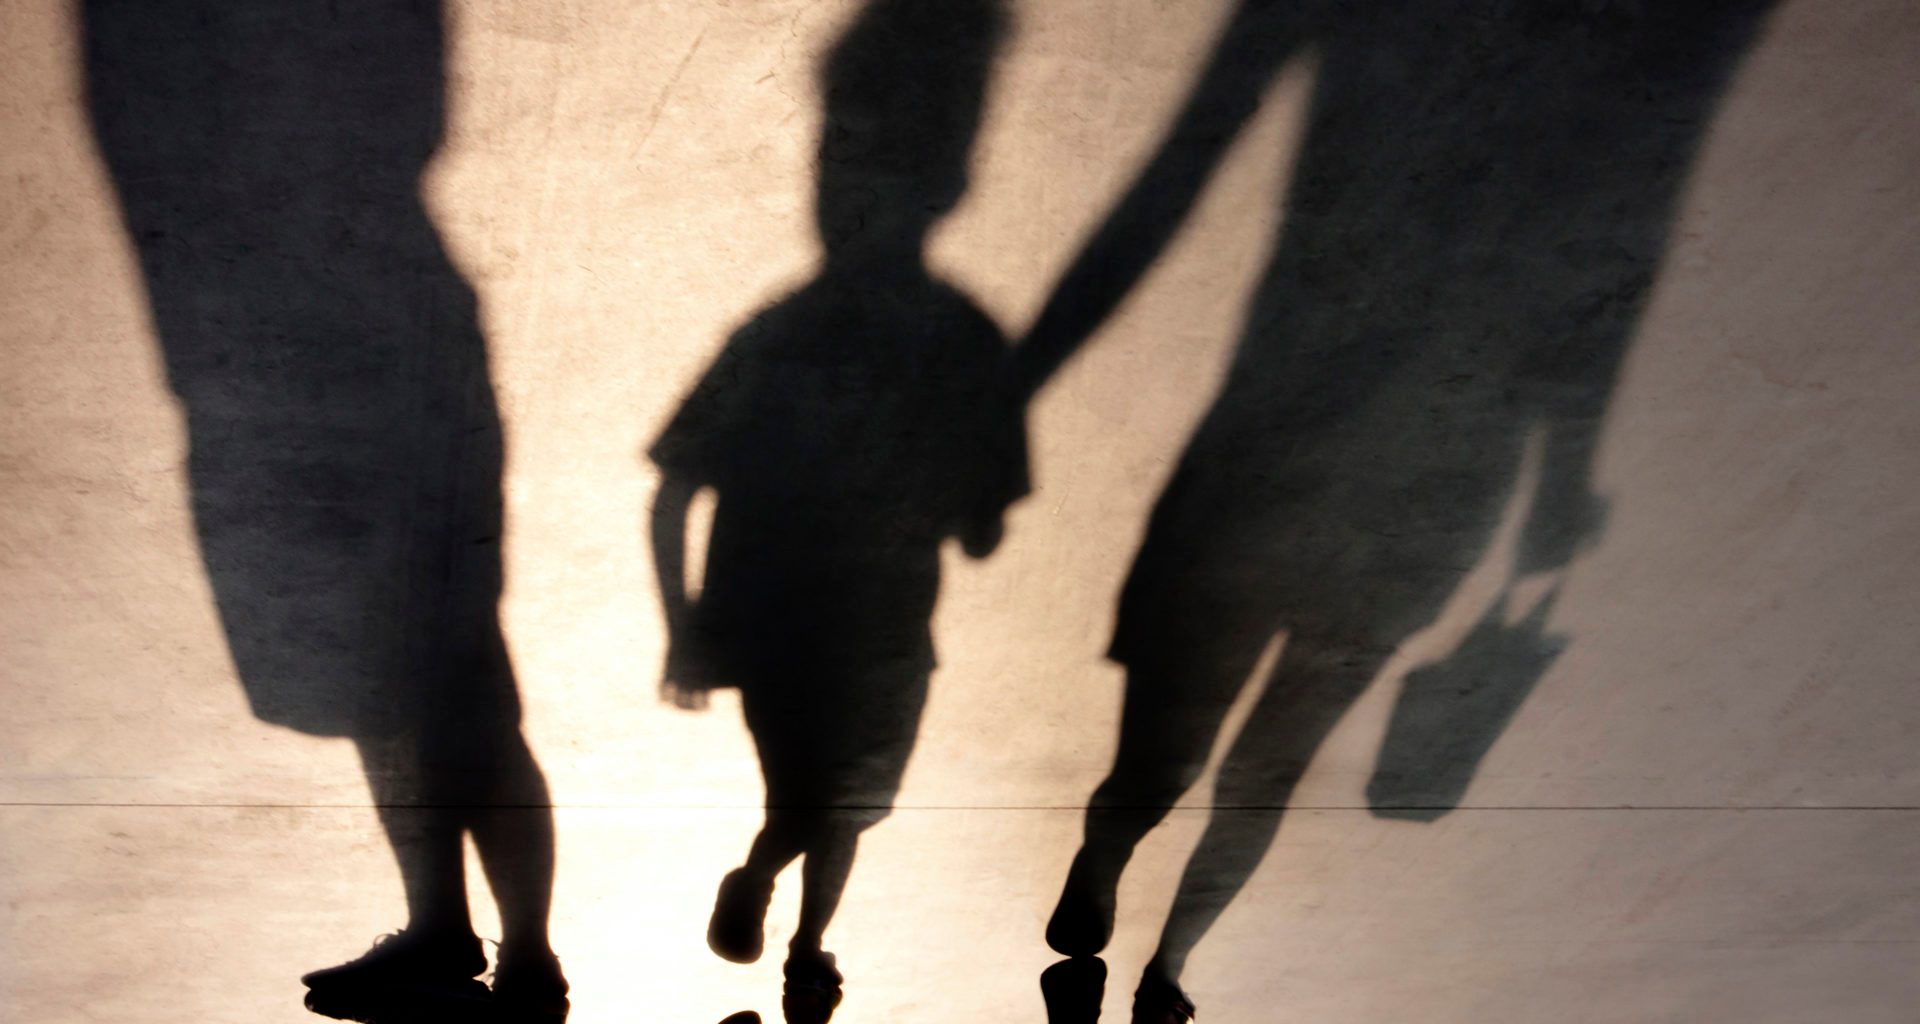 Missing trafficked children prompts claims of "child protection crisis" 4